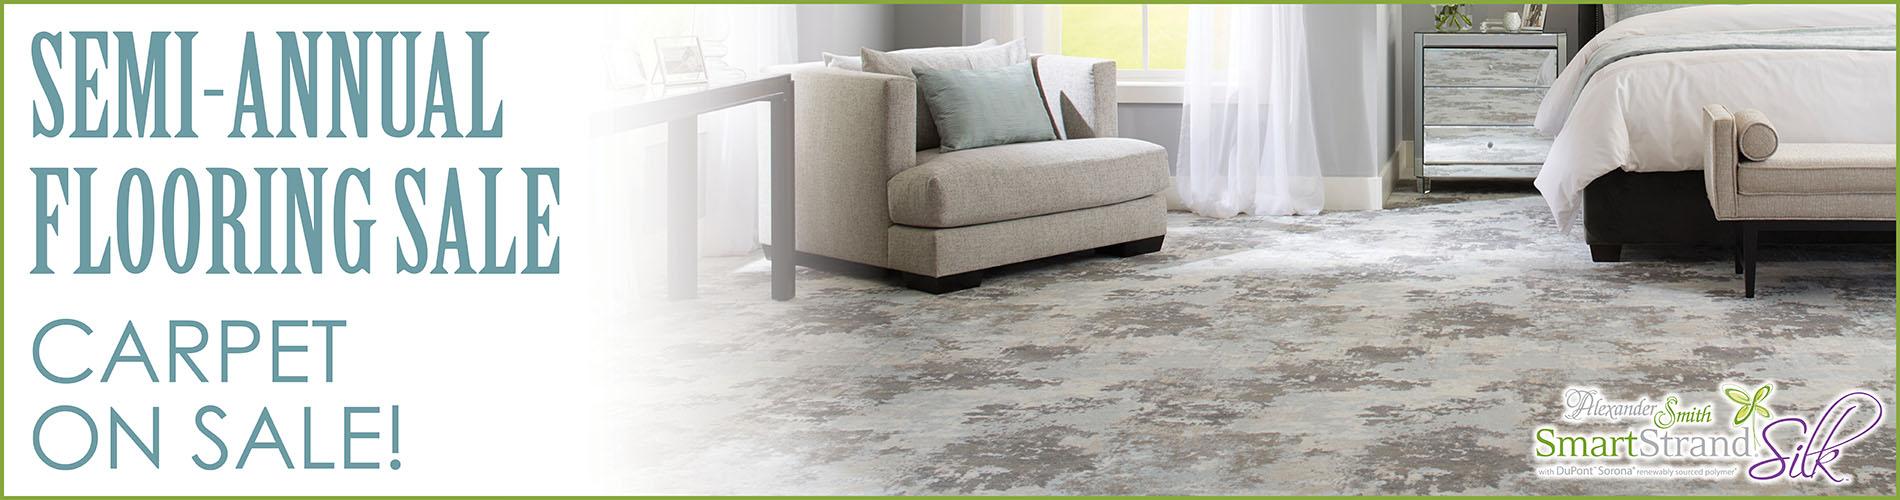 Carpet on sale now at Bendele's Abbey Flooring & Rug in Fort Myers, Florida